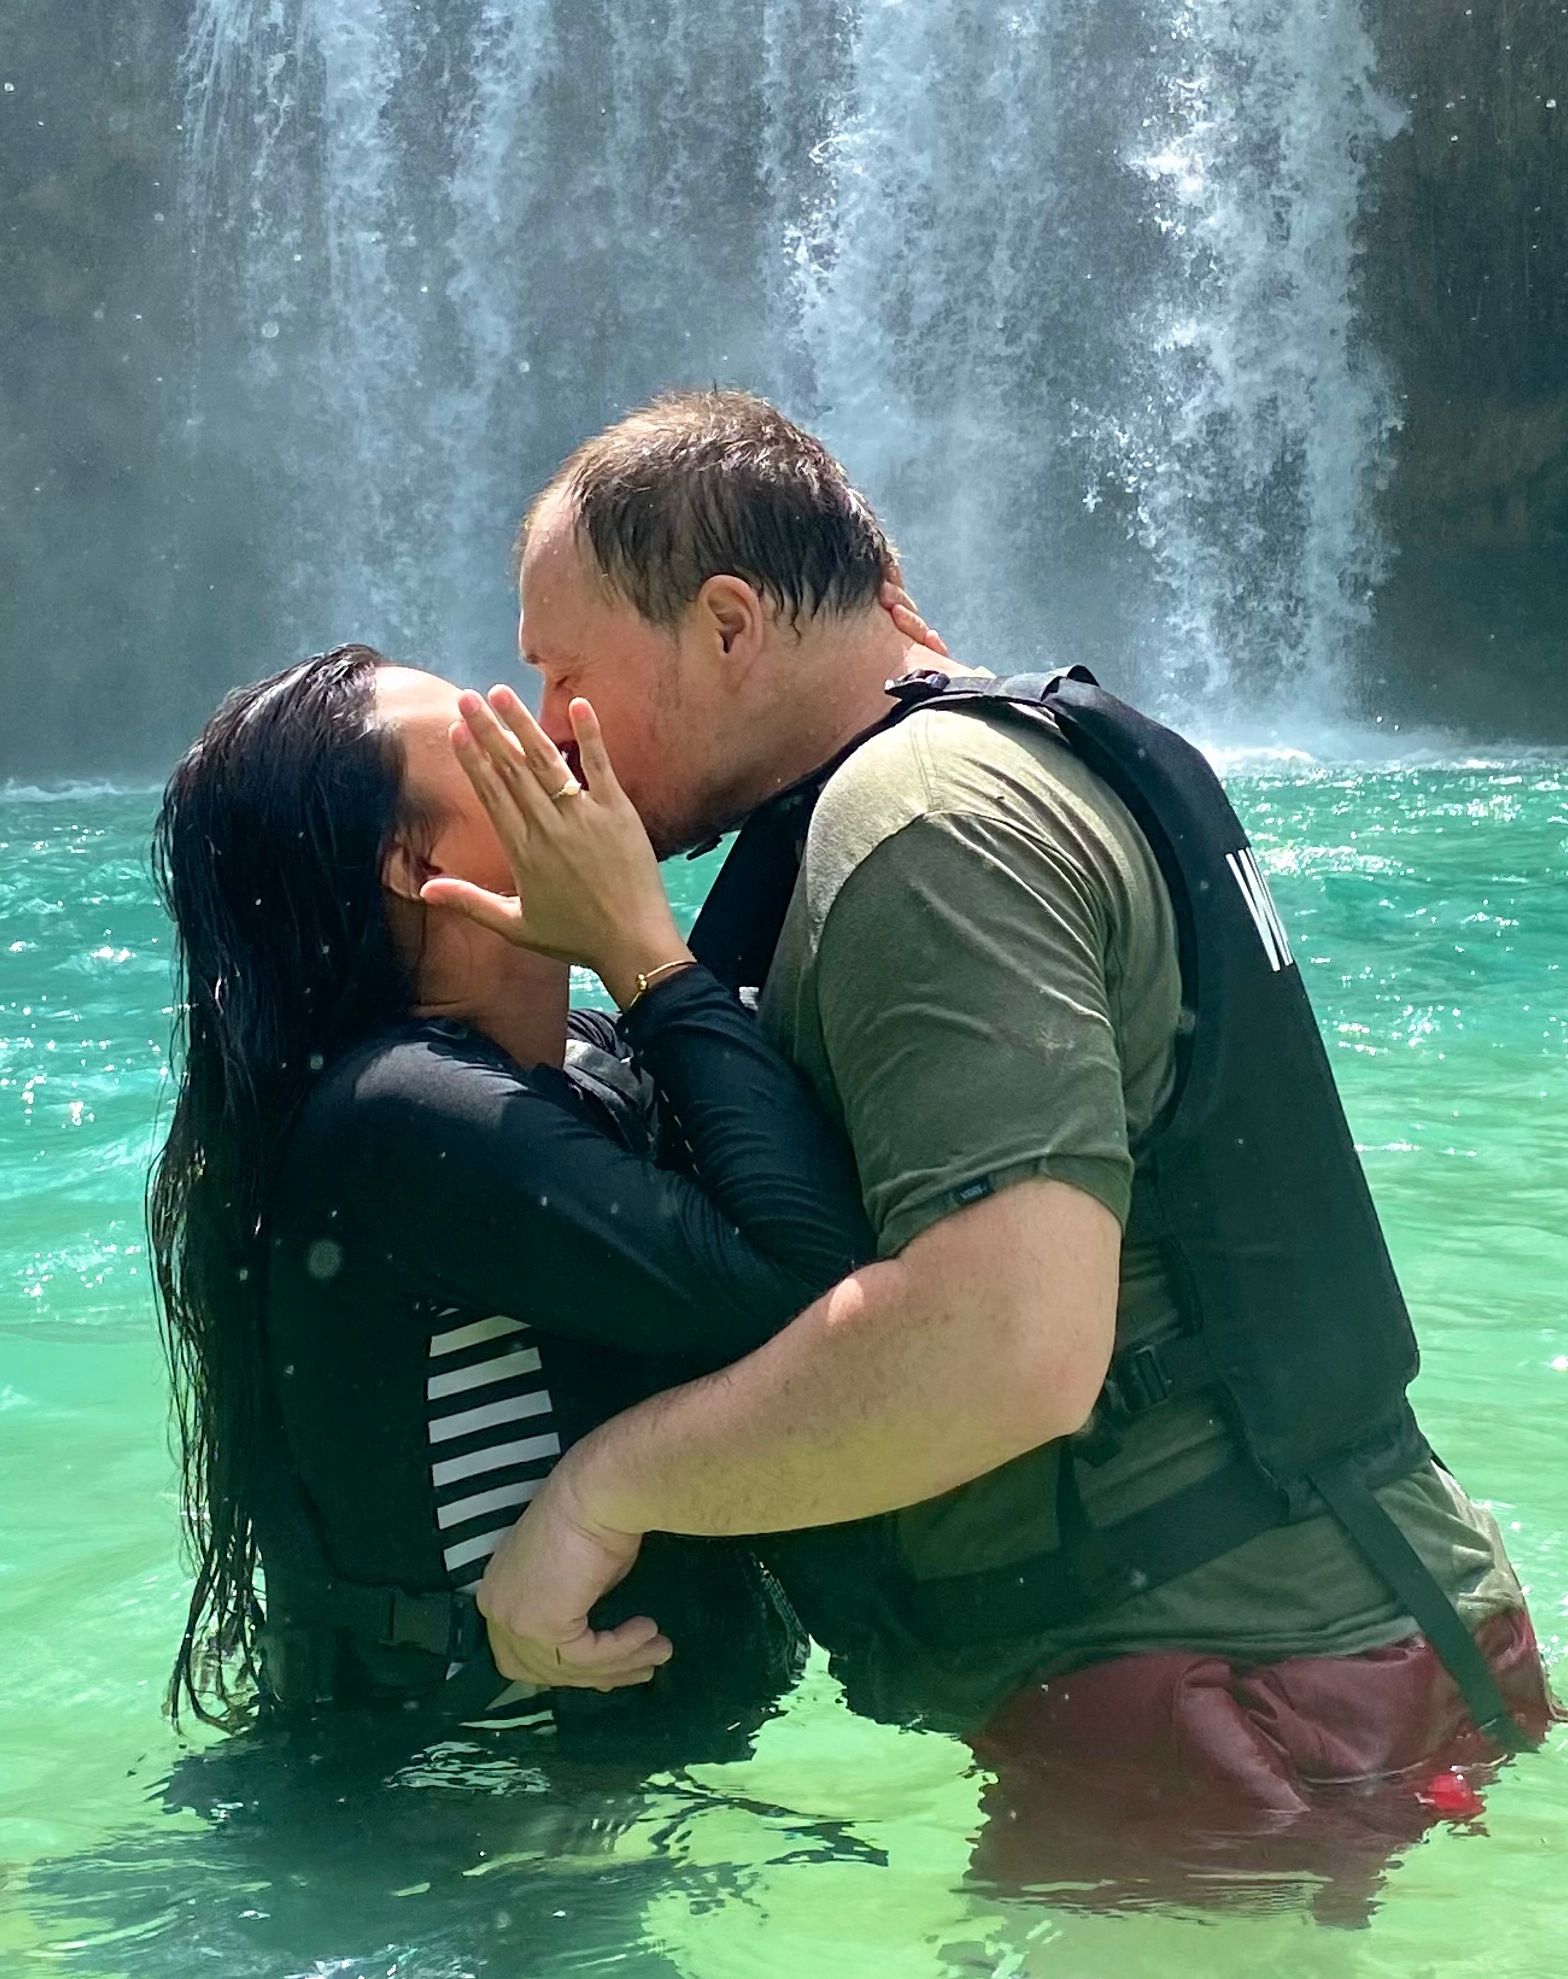 A woman in front of a waterfall shows off her ring as a man leans over to kiss her.